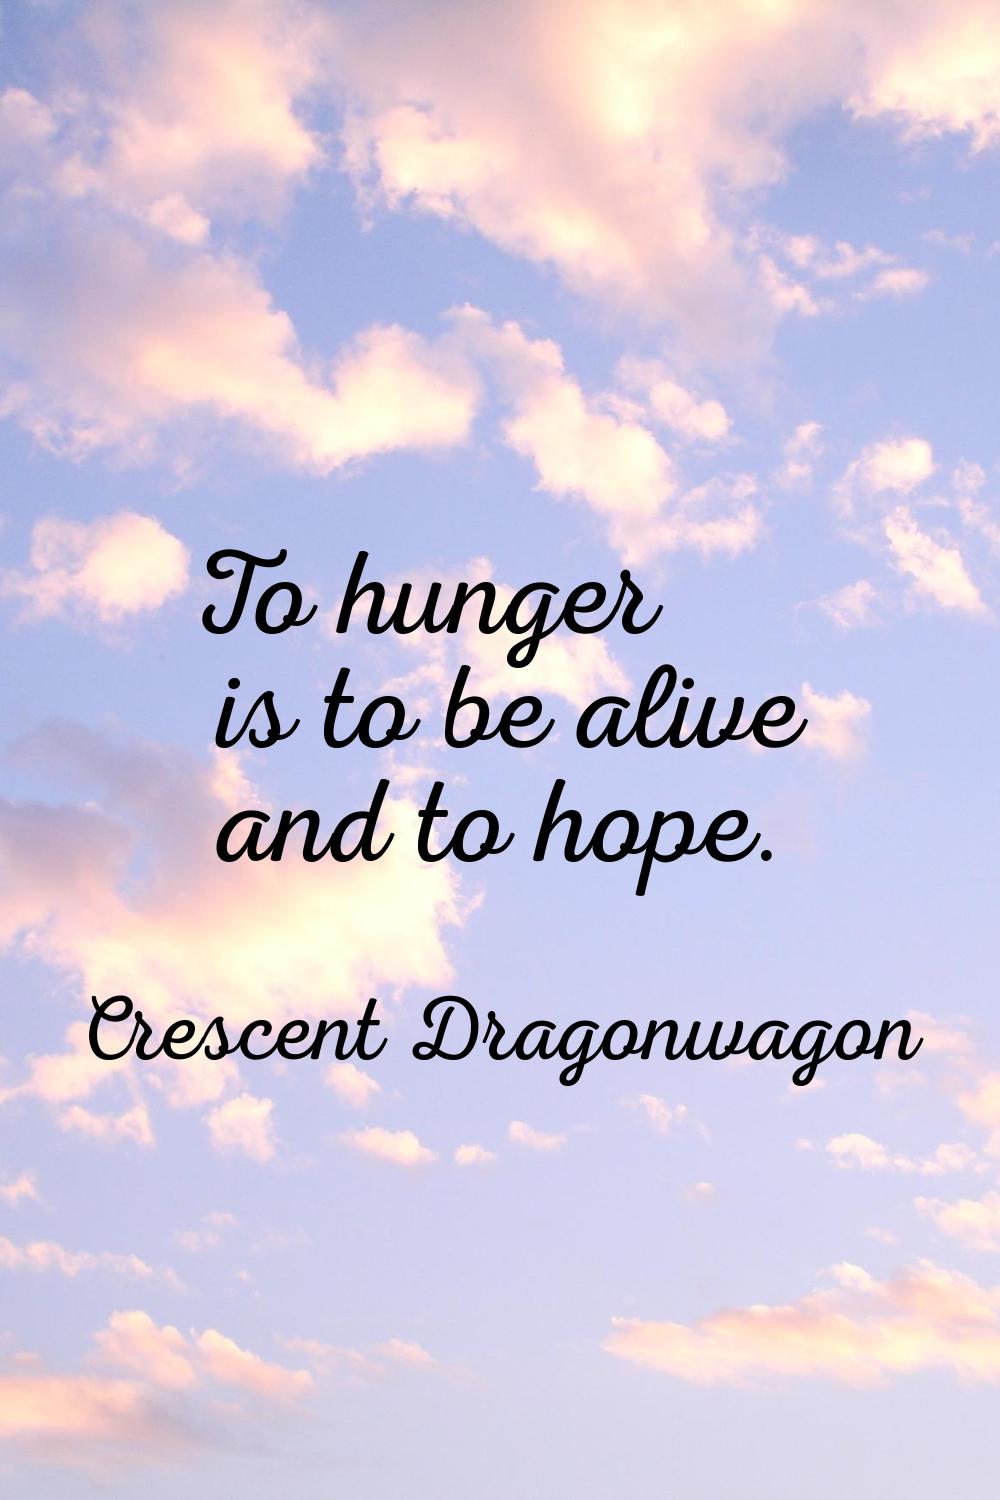 To hunger is to be alive and to hope.